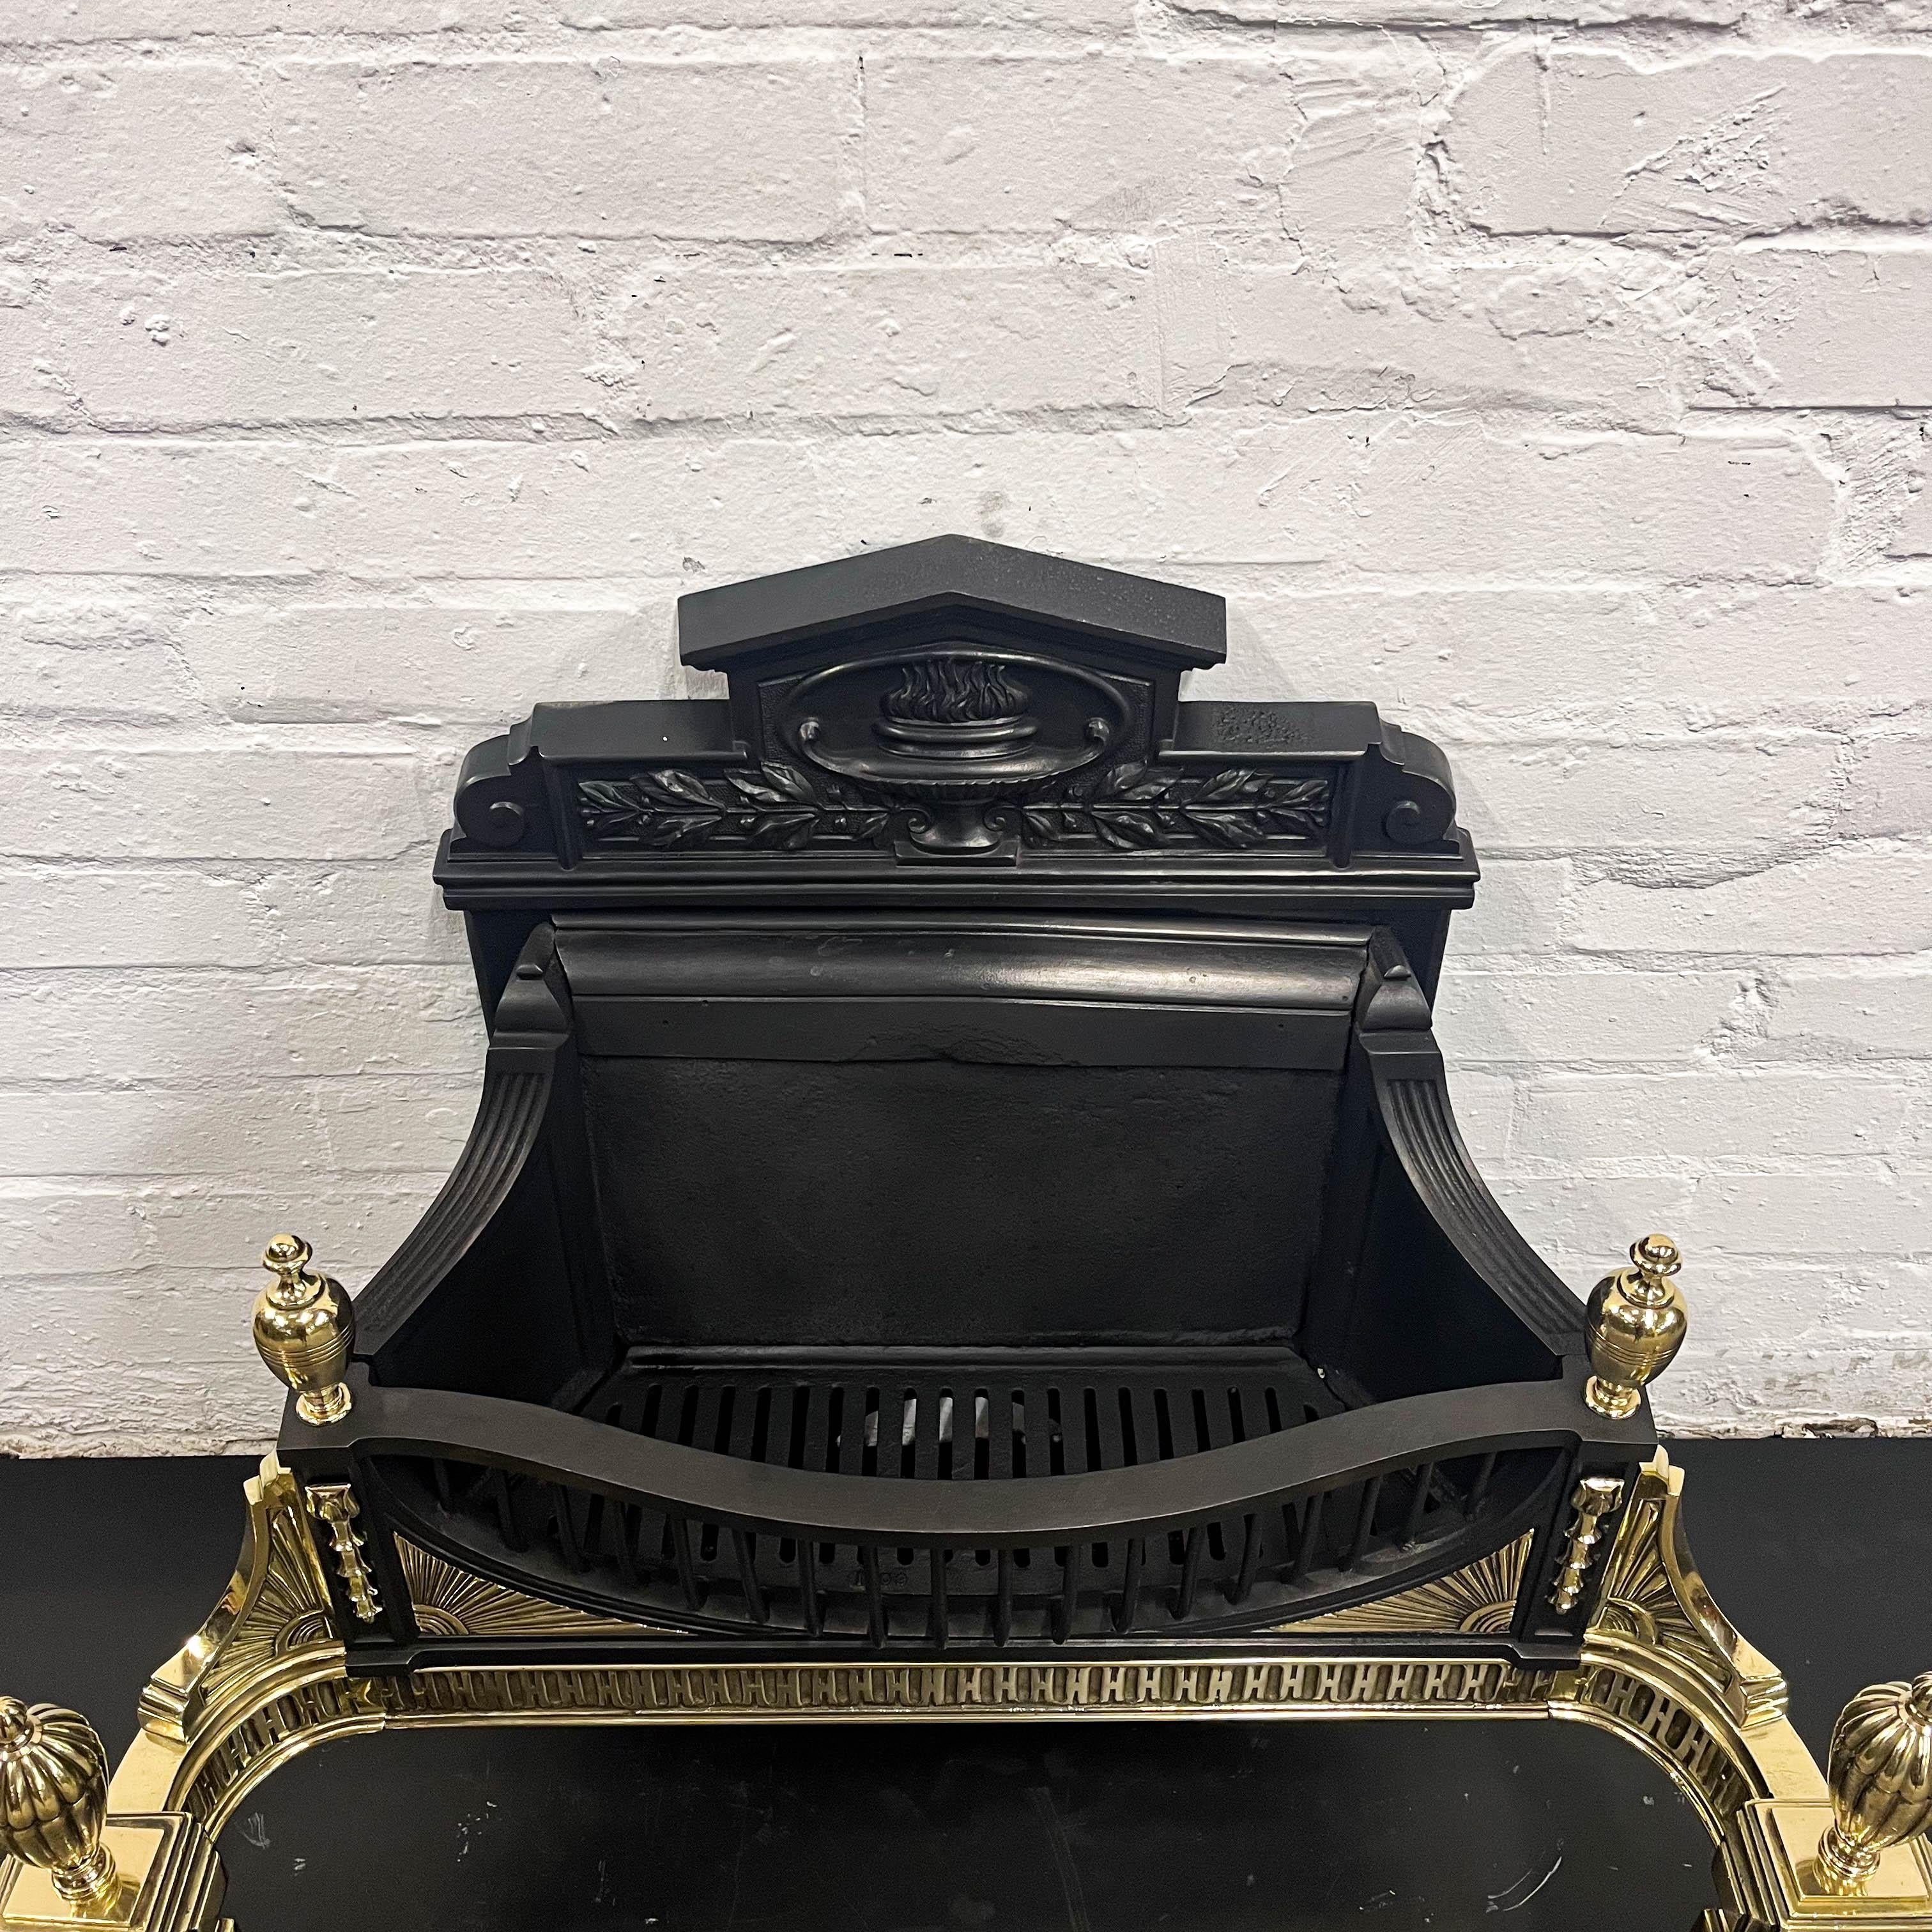 This antique Victorian reclaimed fire basket features classic finials and ornate brass accents throughout. The back of the fire basket is decorated with a cast iron urn and flame motif.

The basket comes complete with an integral cast iron fireback.